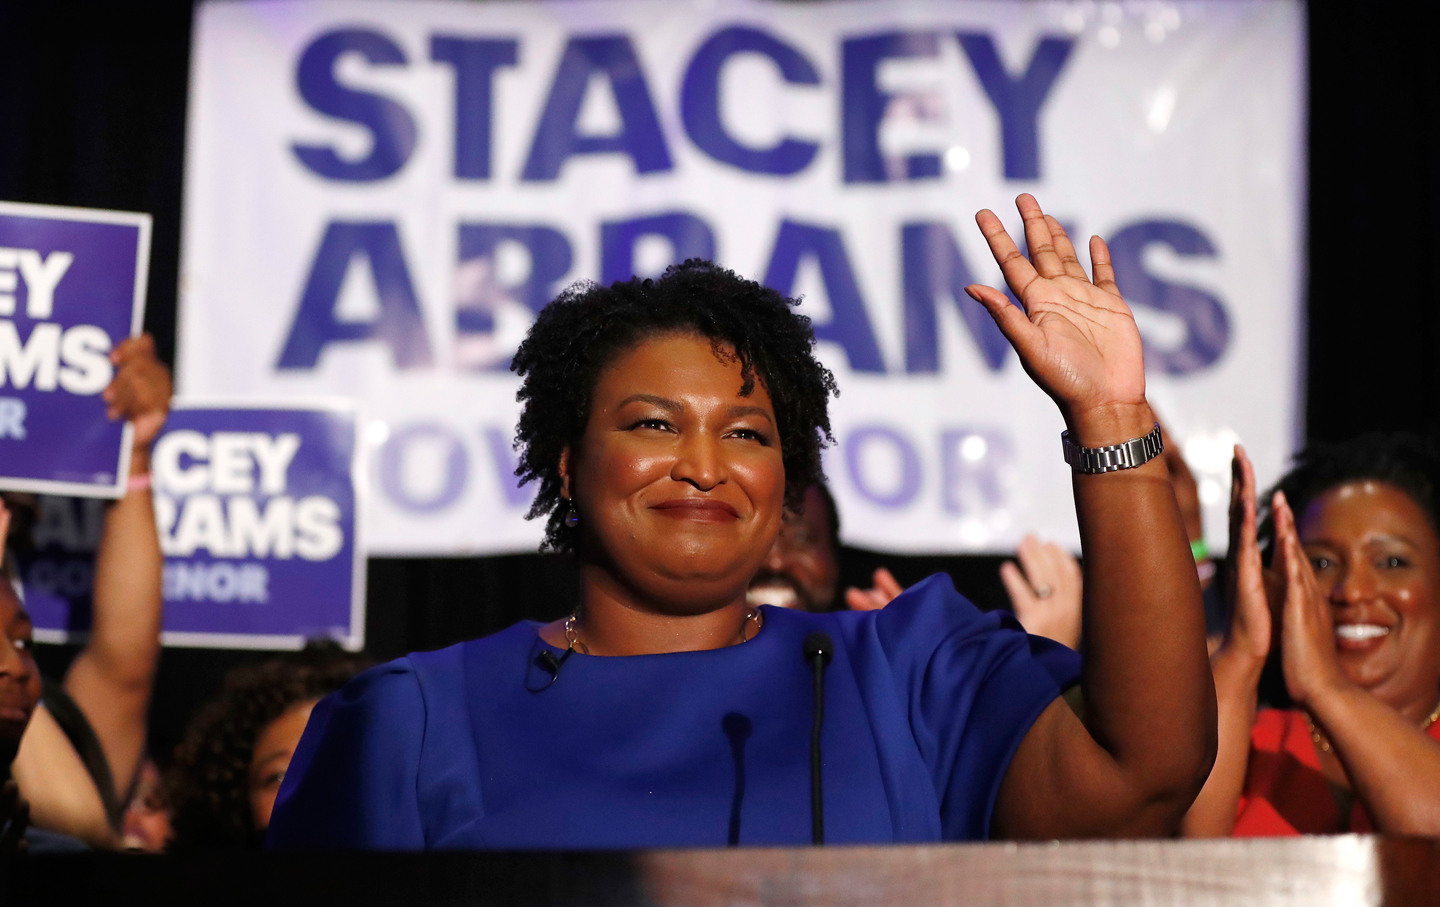 Stacey Abrams Makes History